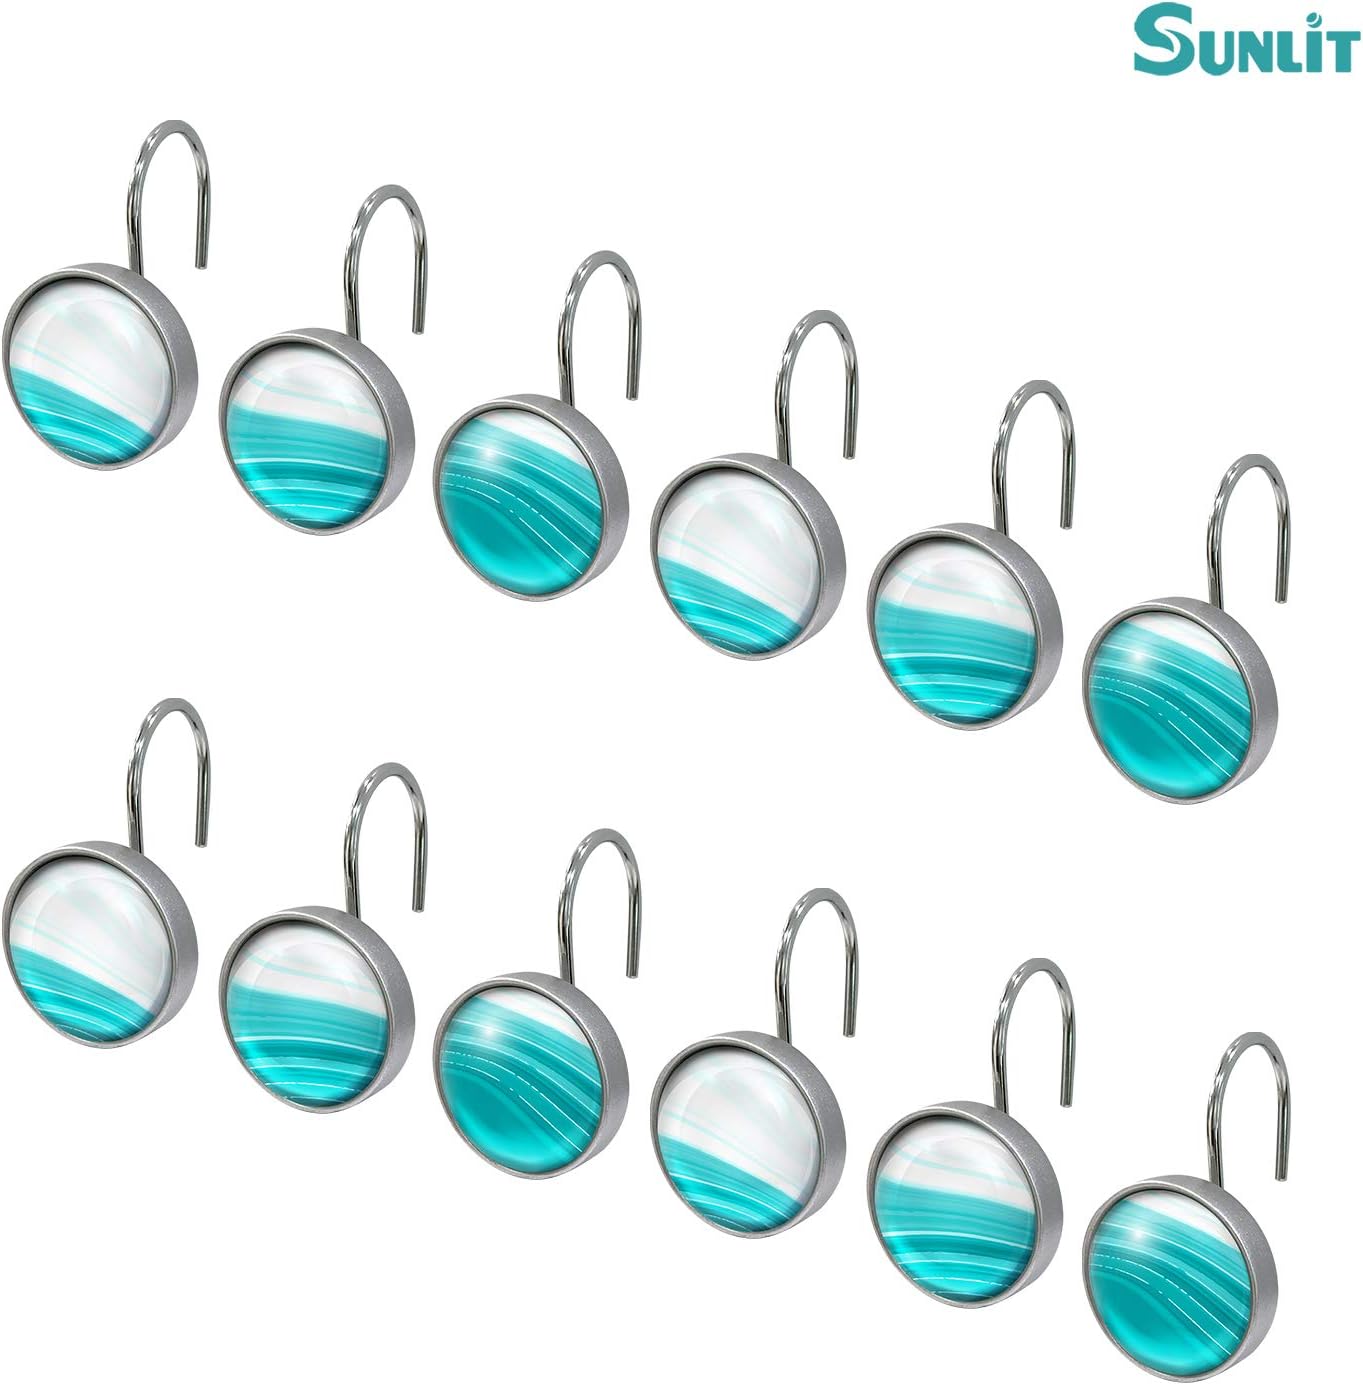 Sunlit Round Crystal Glass Decorative Shower Curtain Hooks, Rust Proof Oil Rubbed Metal Shower Curtain Rings-12 Pack, Gradient Blue